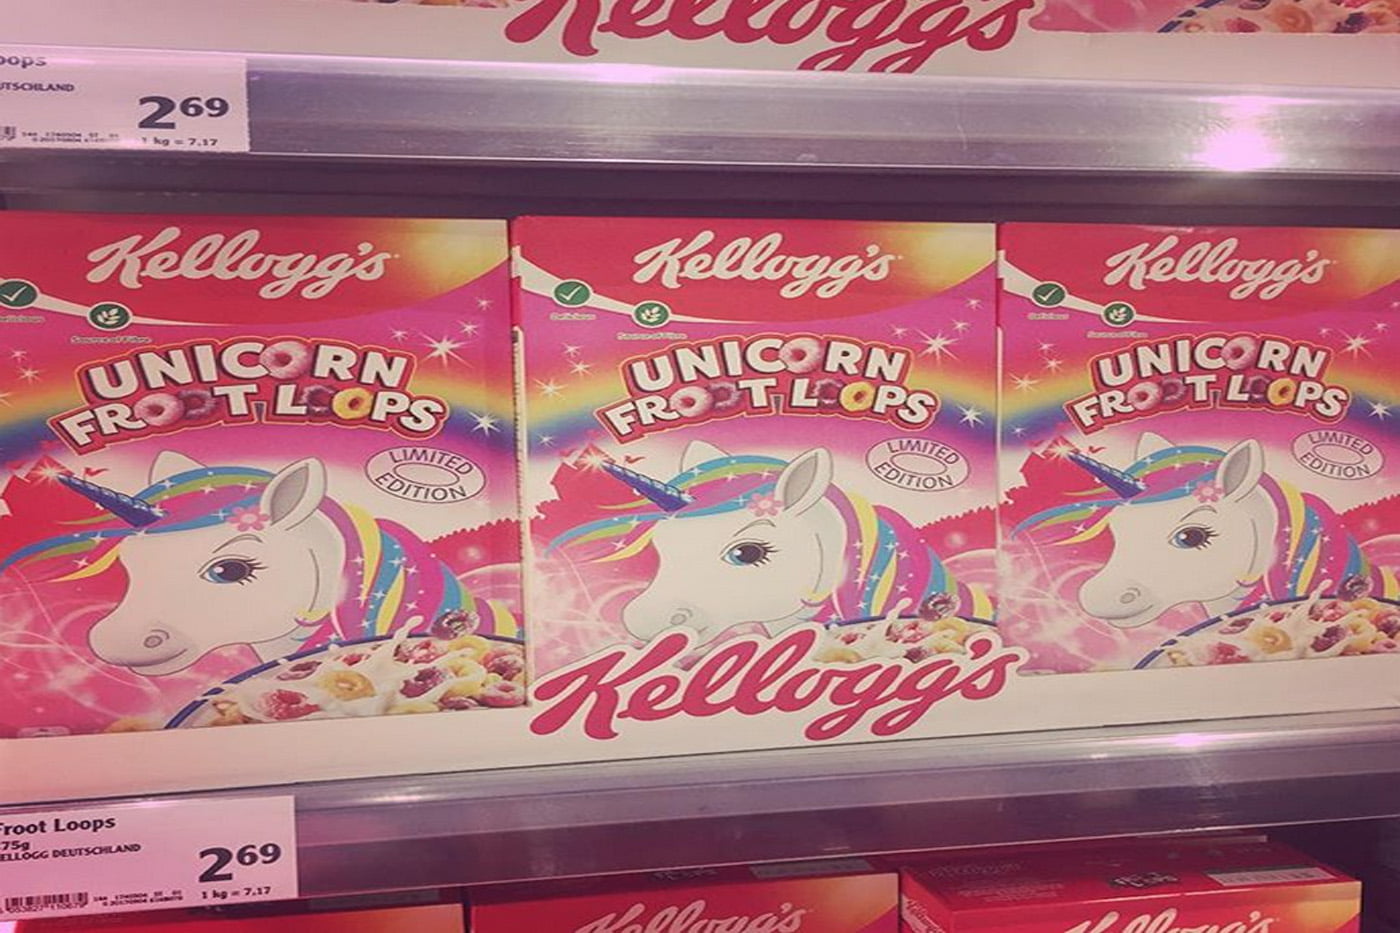 Unicorn Froot Loops Are Now Available in the UK!